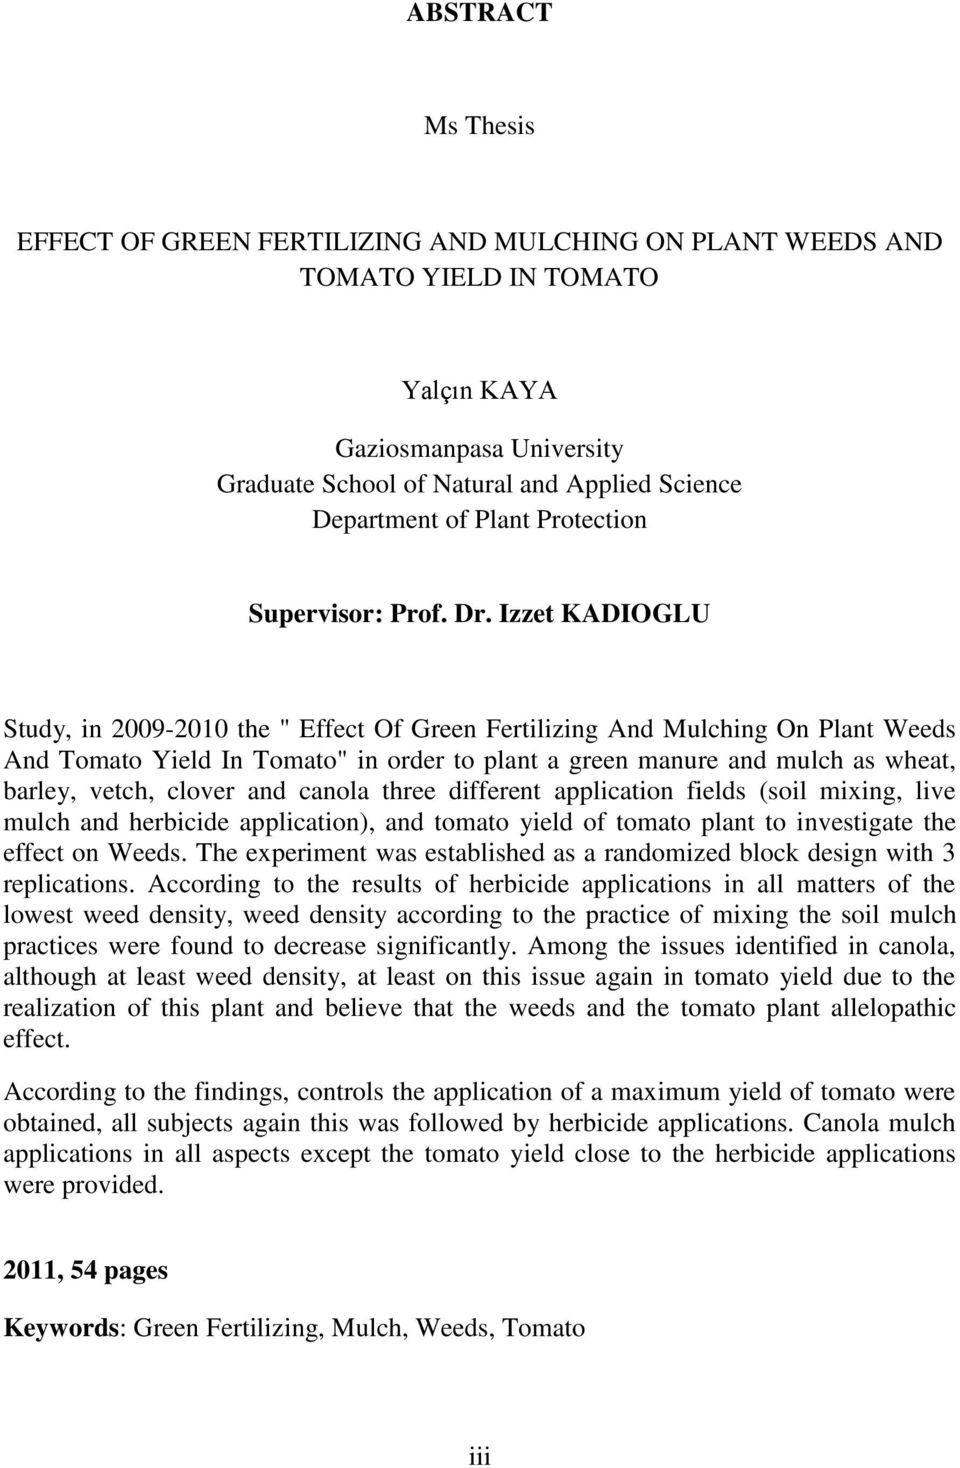 Izzet KADIOGLU Study, in 2009-2010 the " Effect Of Green Fertilizing And Mulching On Plant Weeds And Tomato Yield In Tomato" in order to plant a green manure and mulch as wheat, barley, vetch, clover